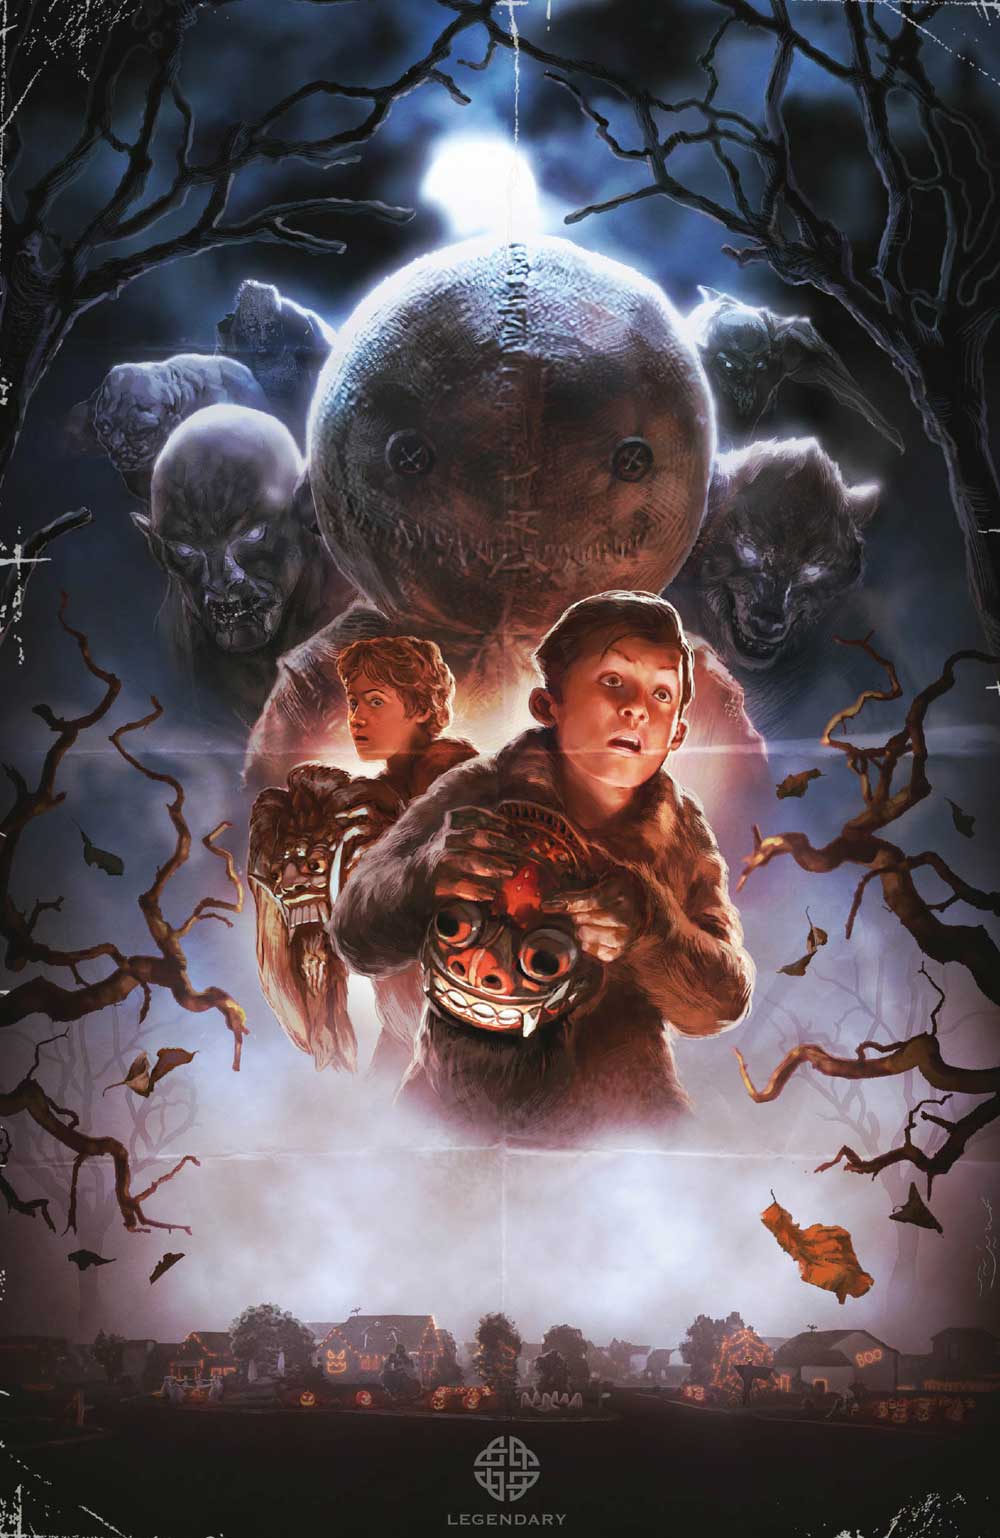 http://www.dreadcentral.com/news/93836/legendary-comics-haunt-your-holidays-with-trick-r-treat-and-krampus-graphic-novels/